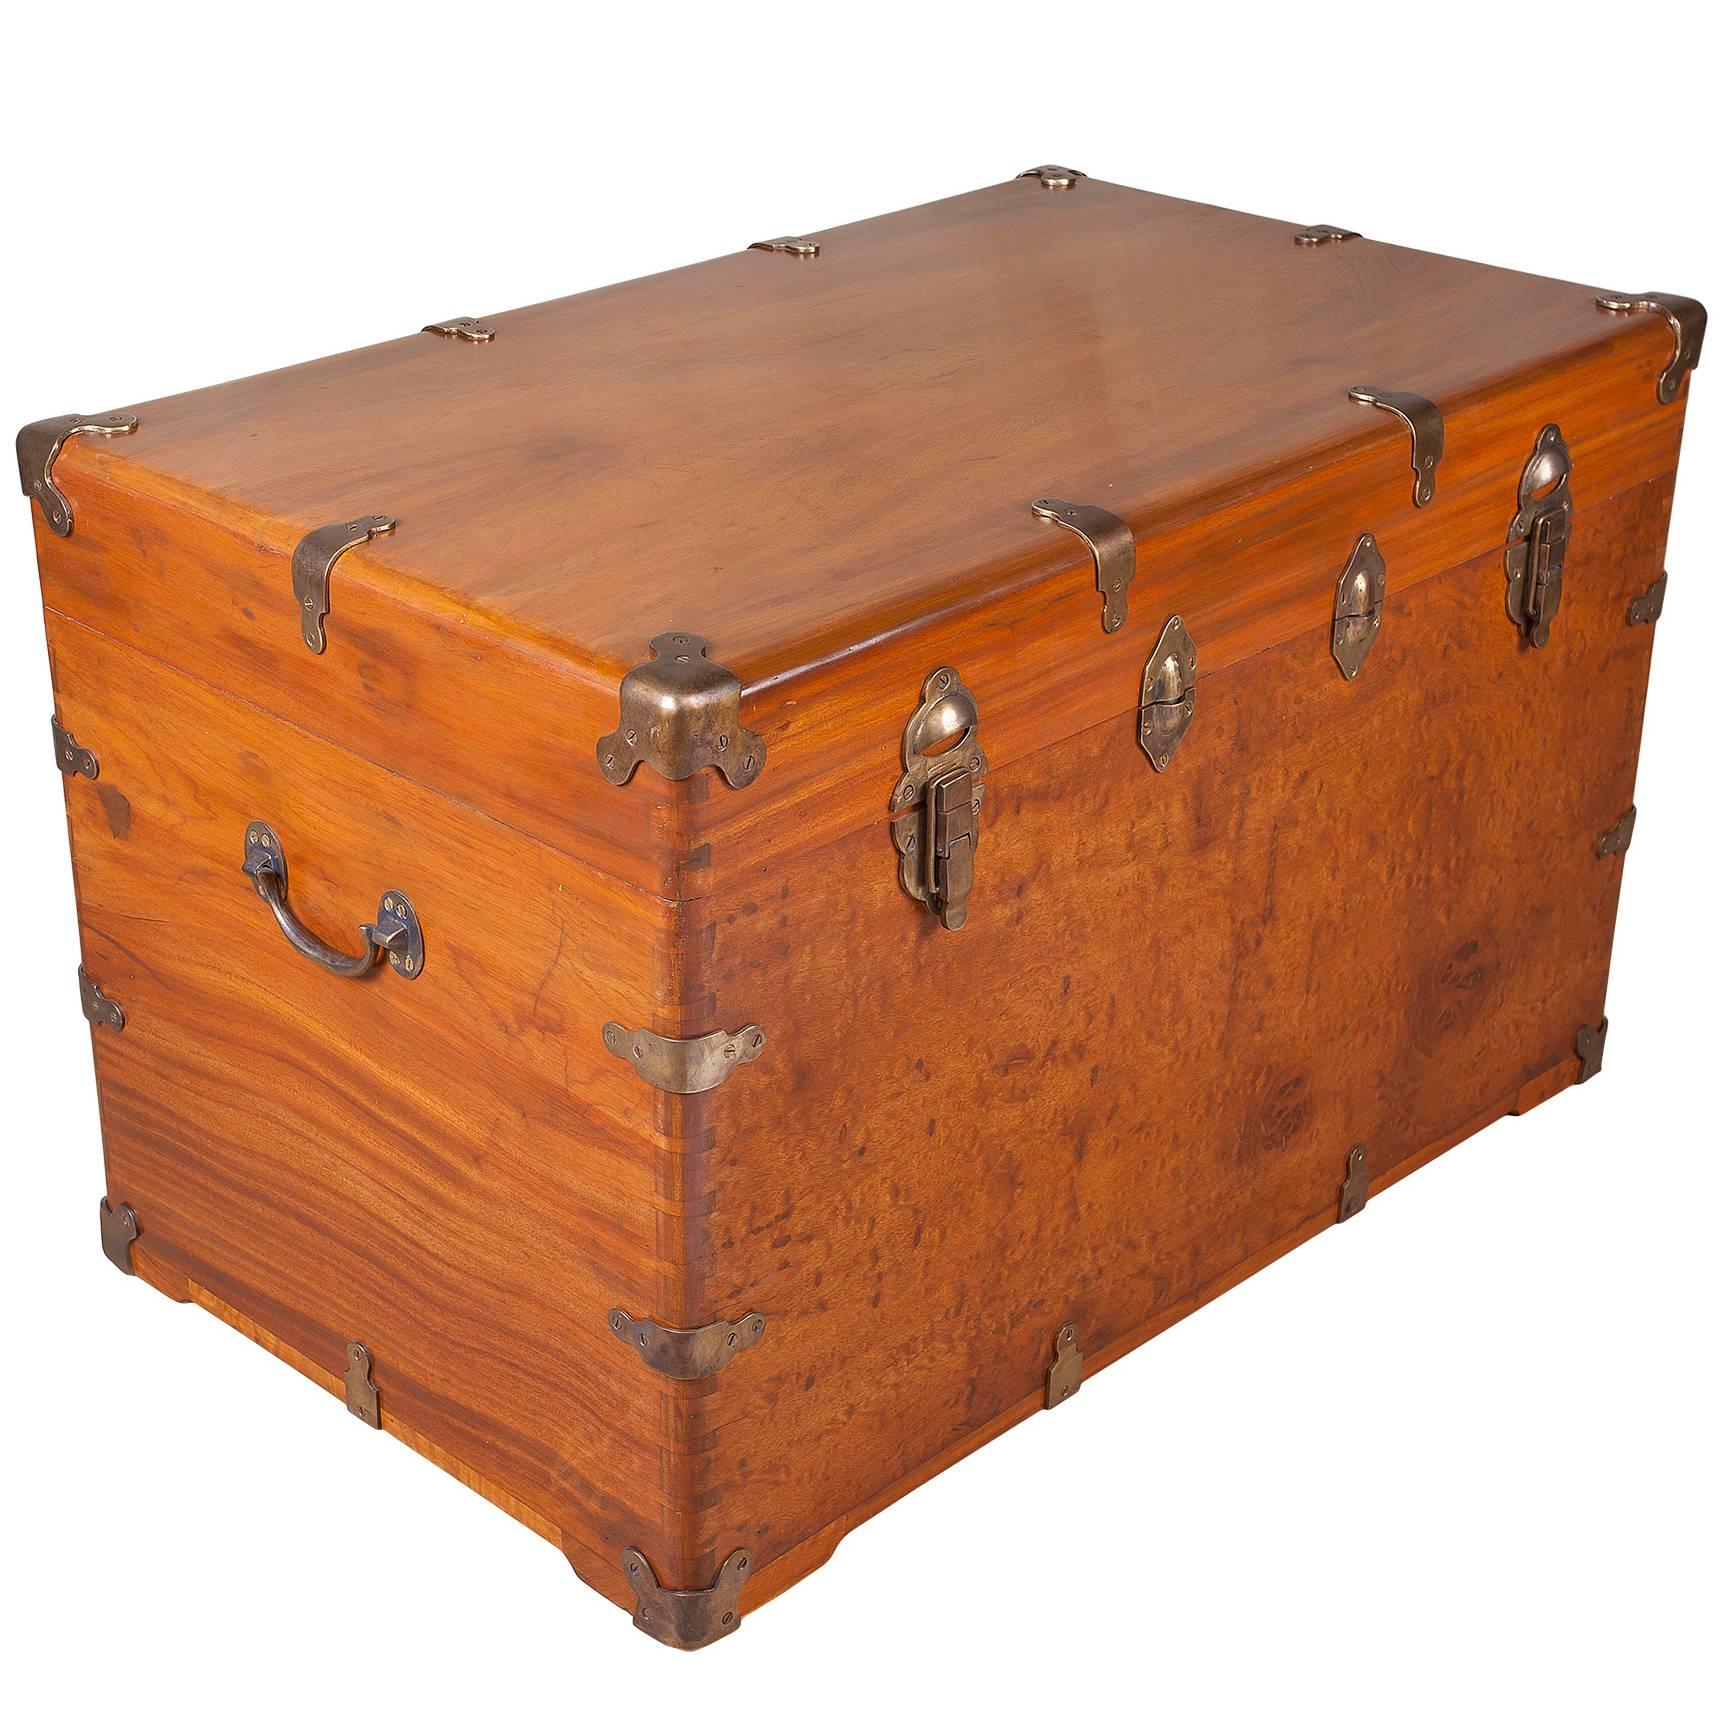 Late 19th Century Camphor Wood Sea Chest with Brass Hardware